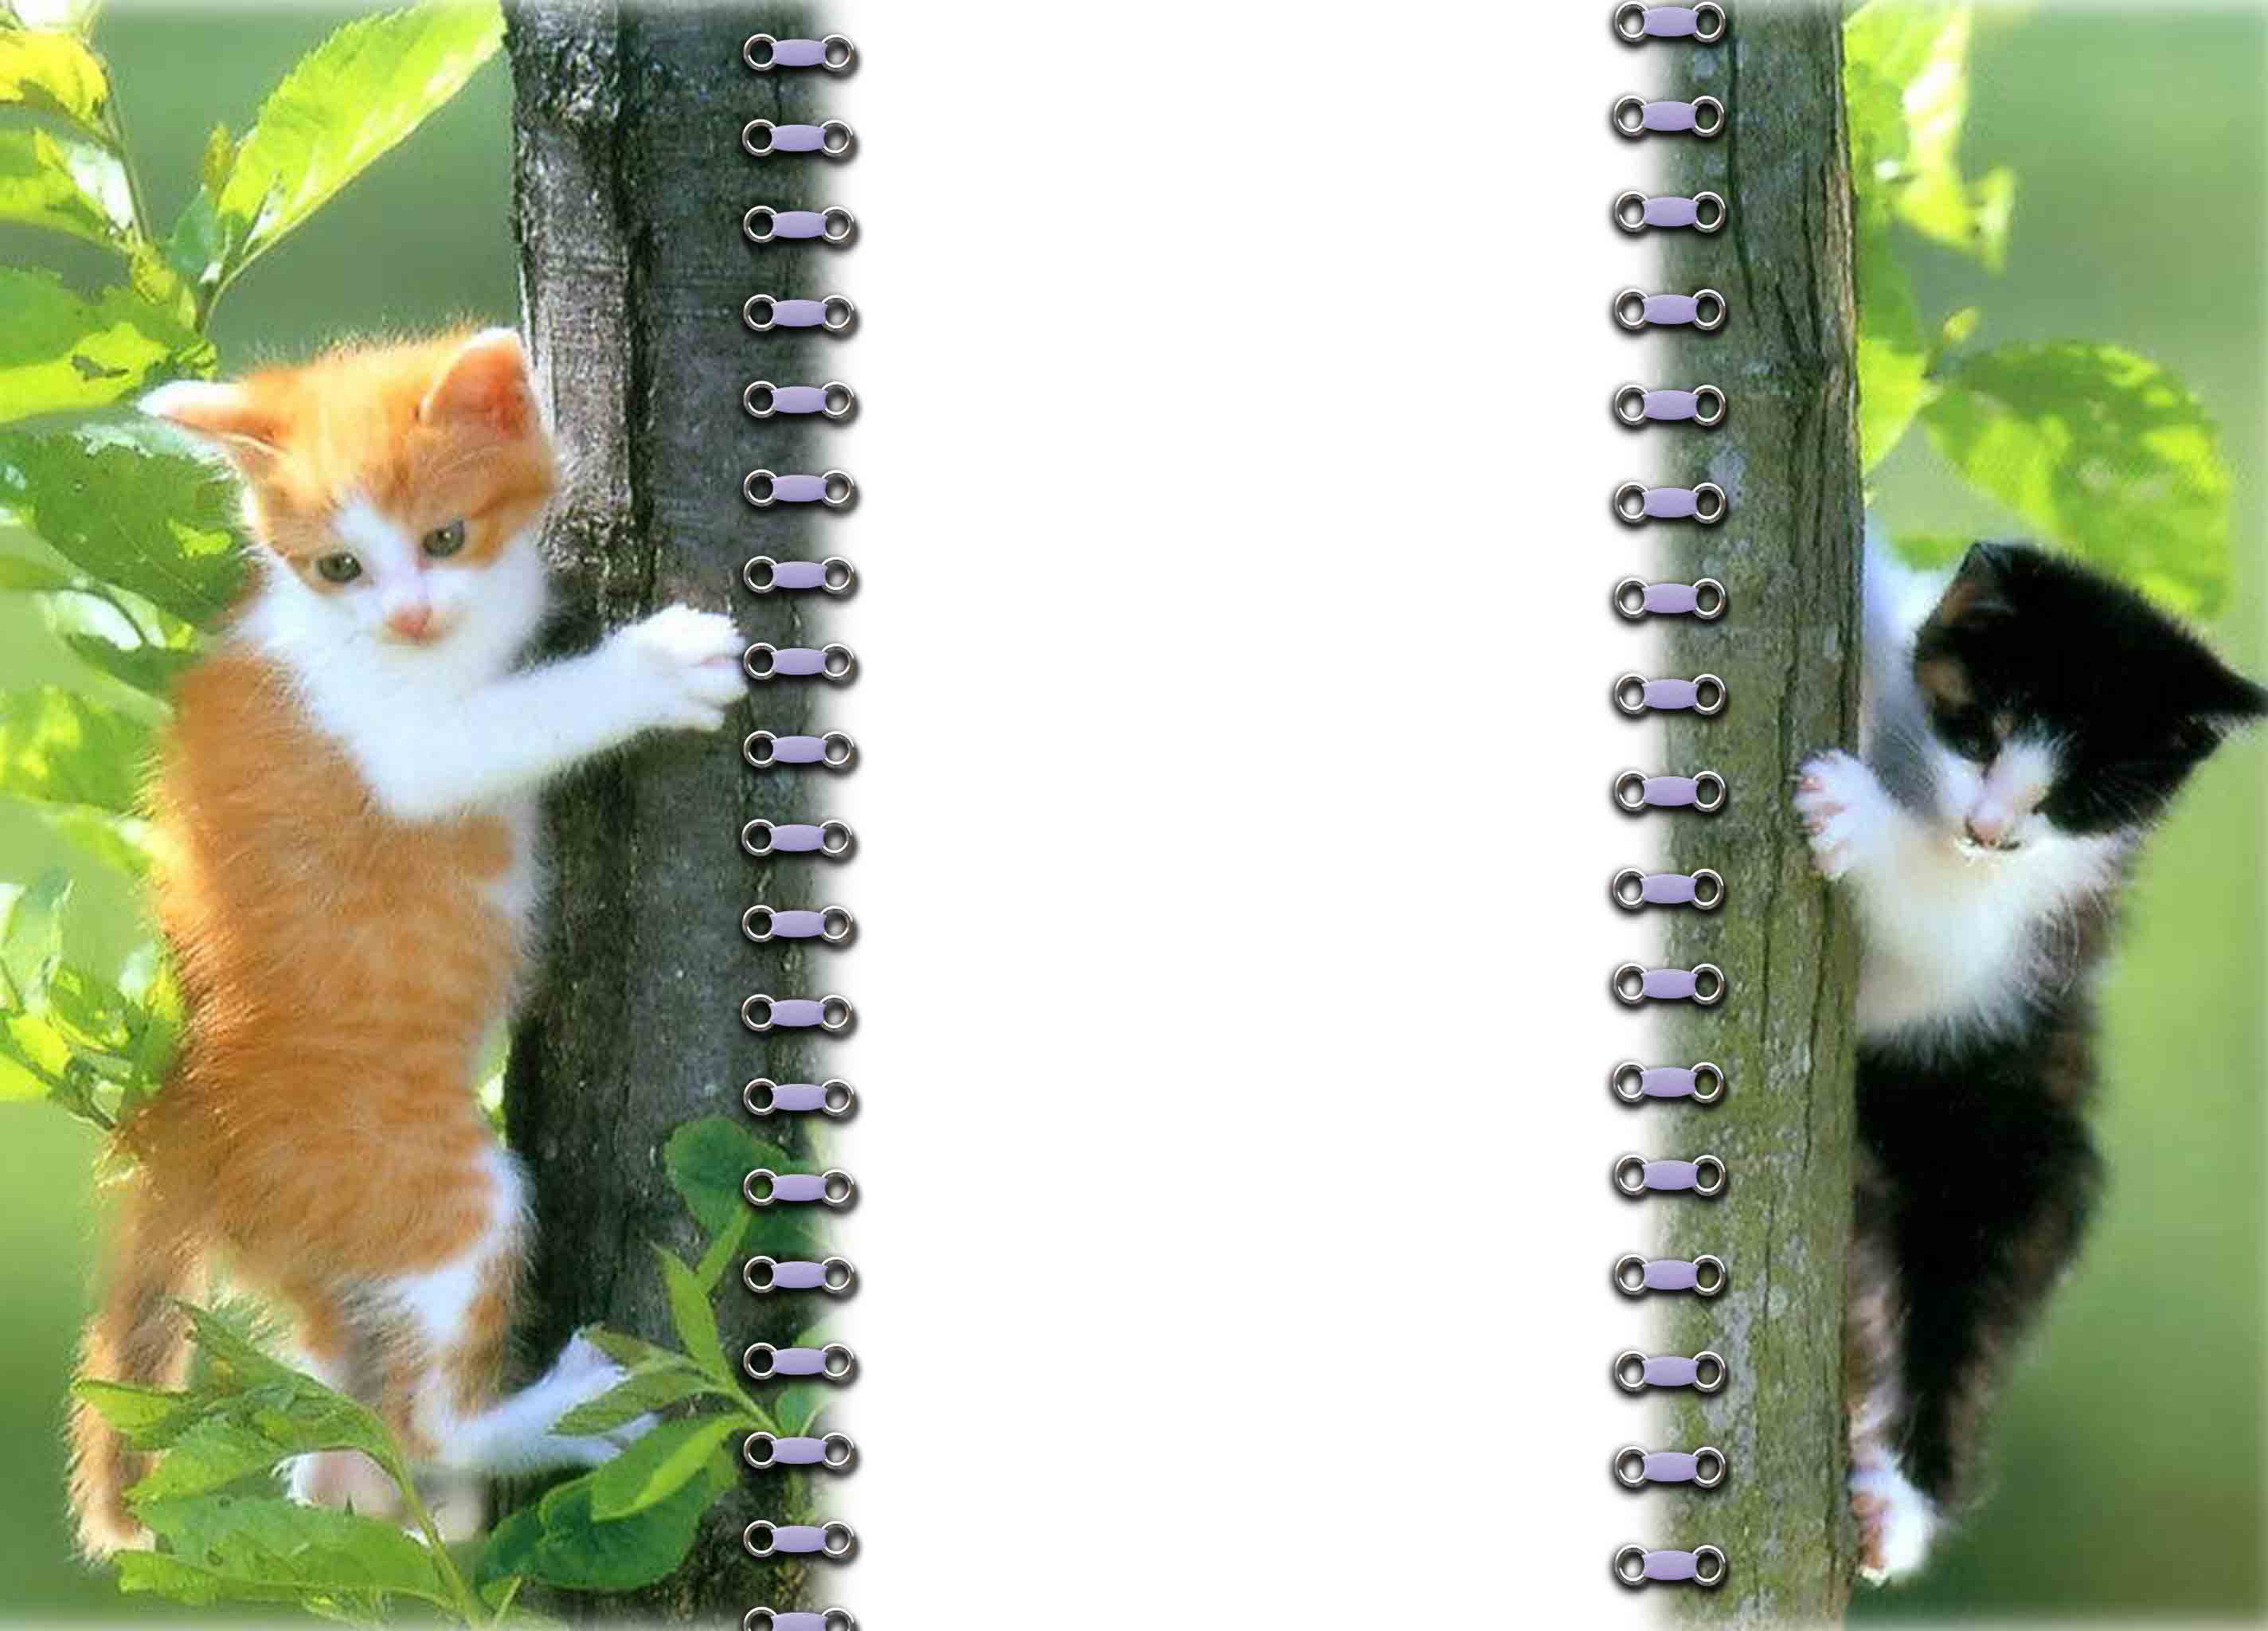 Kittens Frame Wallpapers High Quality | Download Free